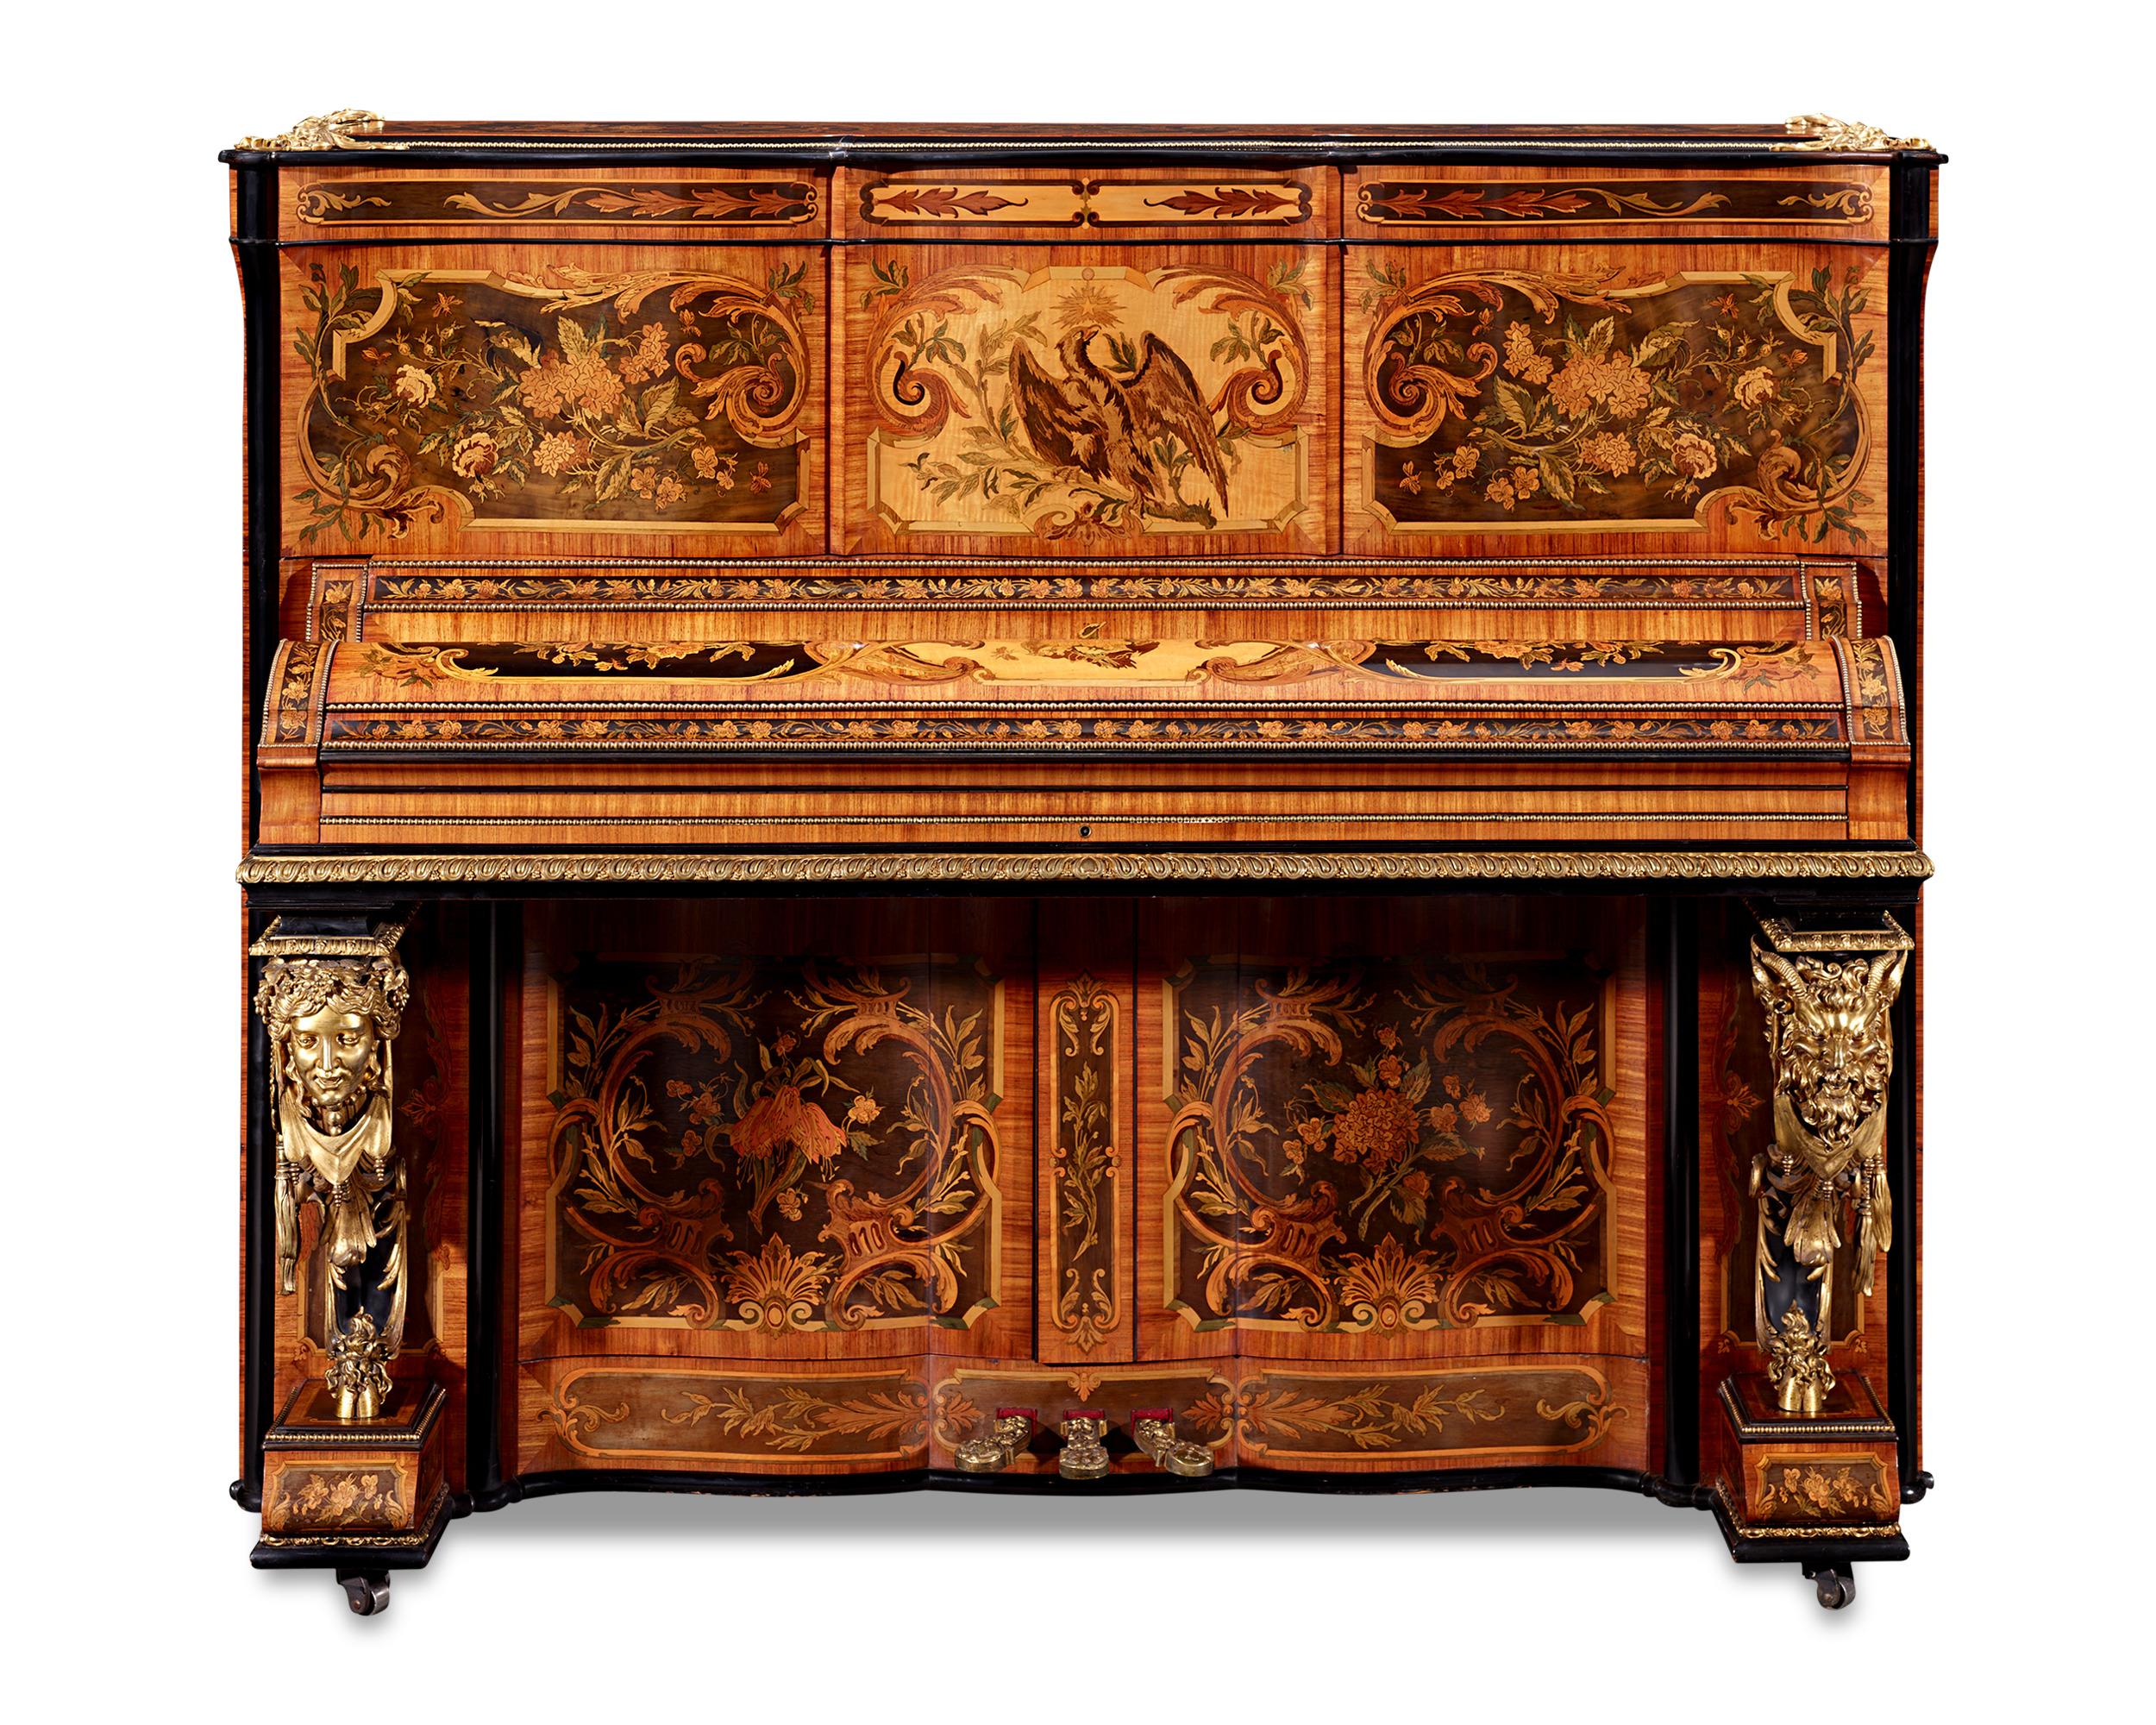 Crafted by renowned French artisan and author Claude Montal, this piano was presented at the famed Crystal Palace exhibition in London in 1851, where it was highly awarded for its exquisite craftsmanship. Three years later, at the 1855 Exposition